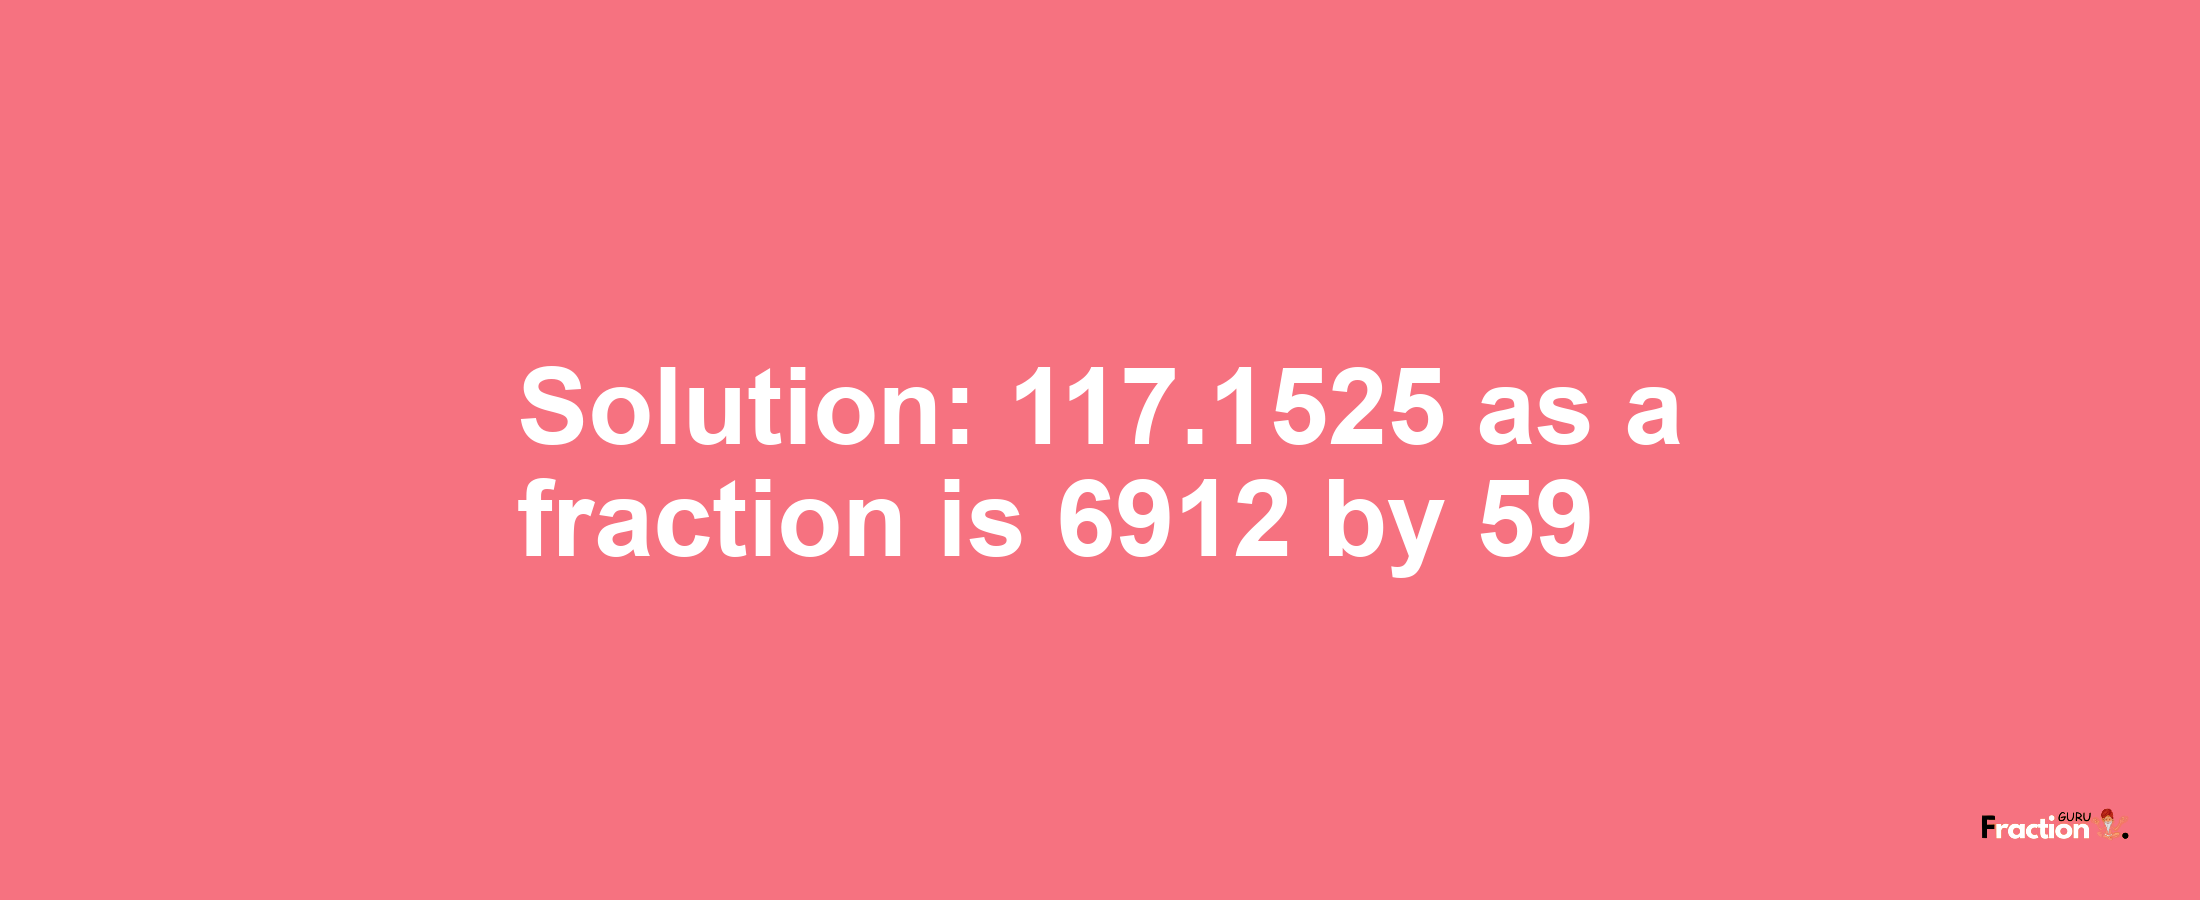 Solution:117.1525 as a fraction is 6912/59